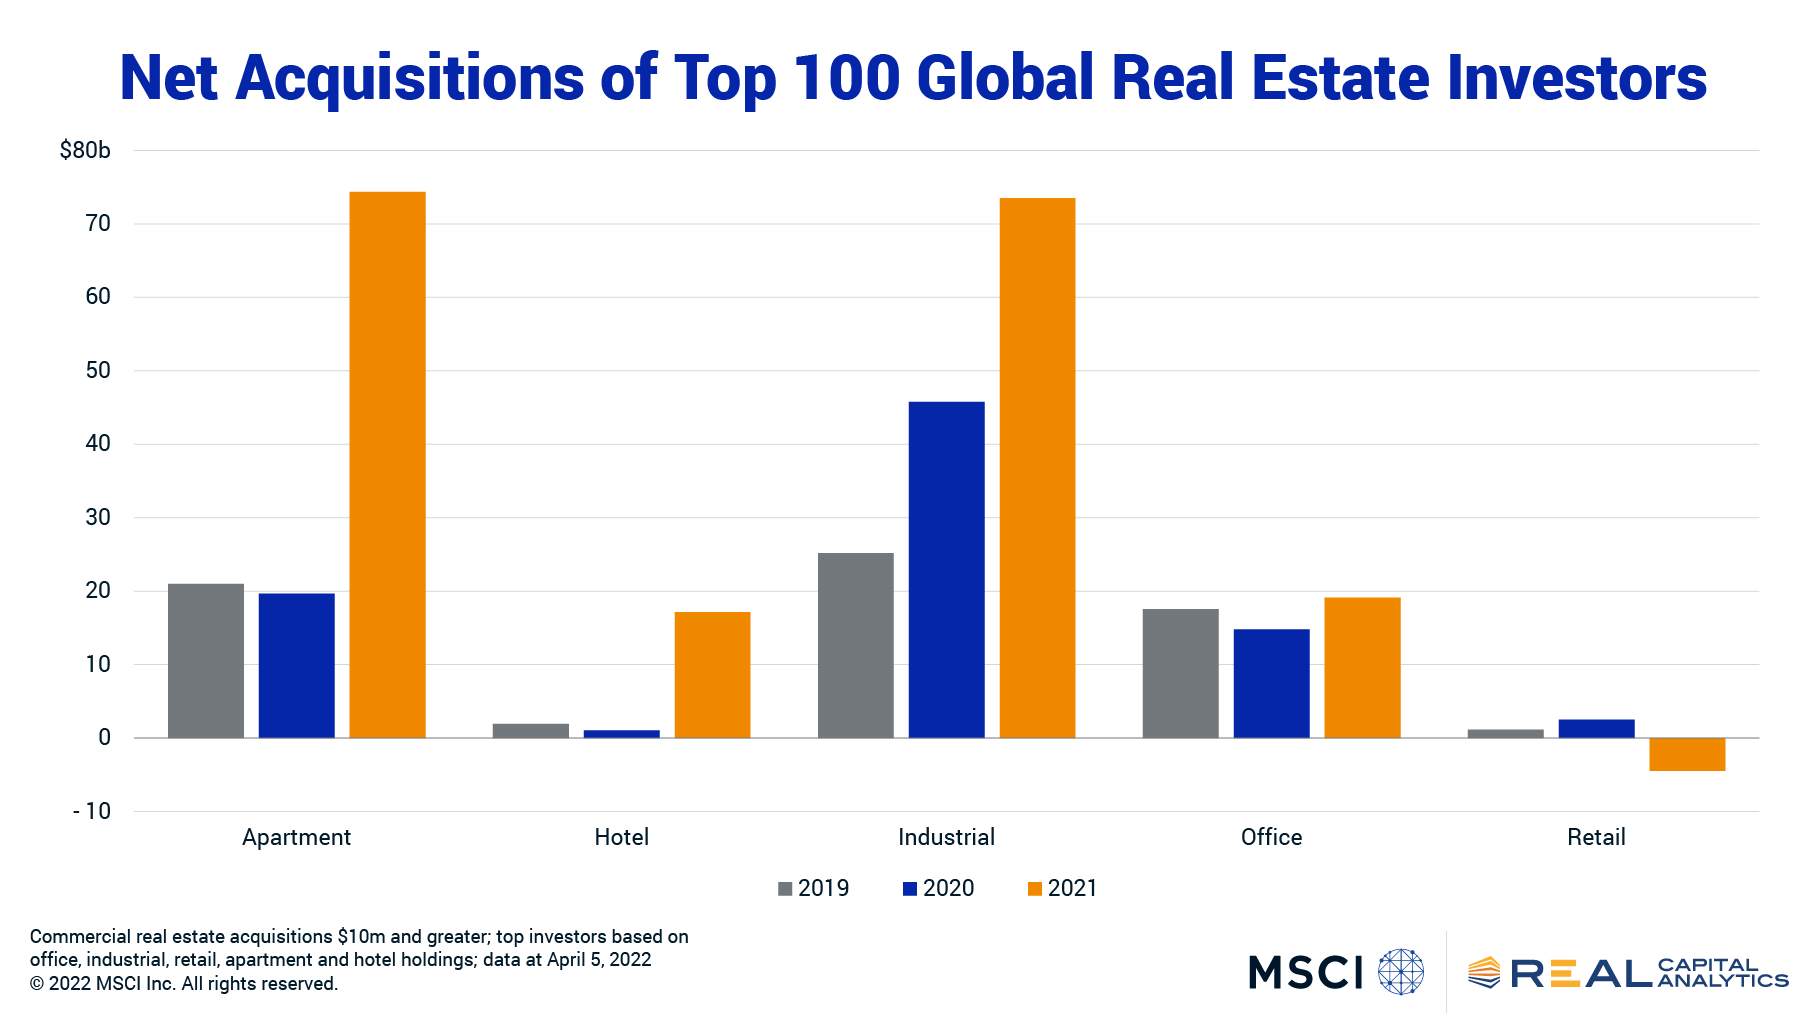 bar chart of top global investor acquisitions across major property sectors